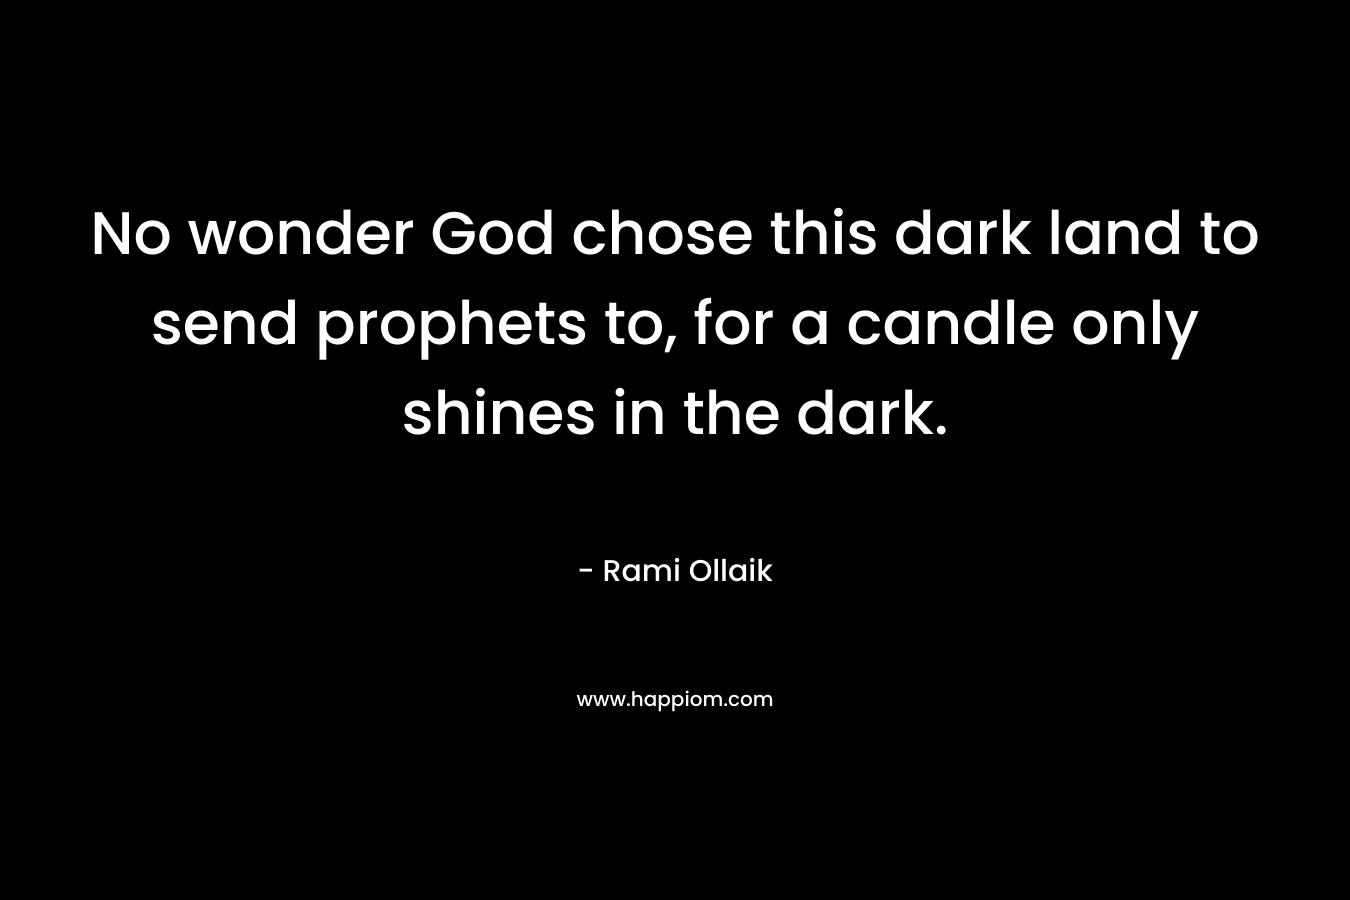 No wonder God chose this dark land to send prophets to, for a candle only shines in the dark. – Rami Ollaik